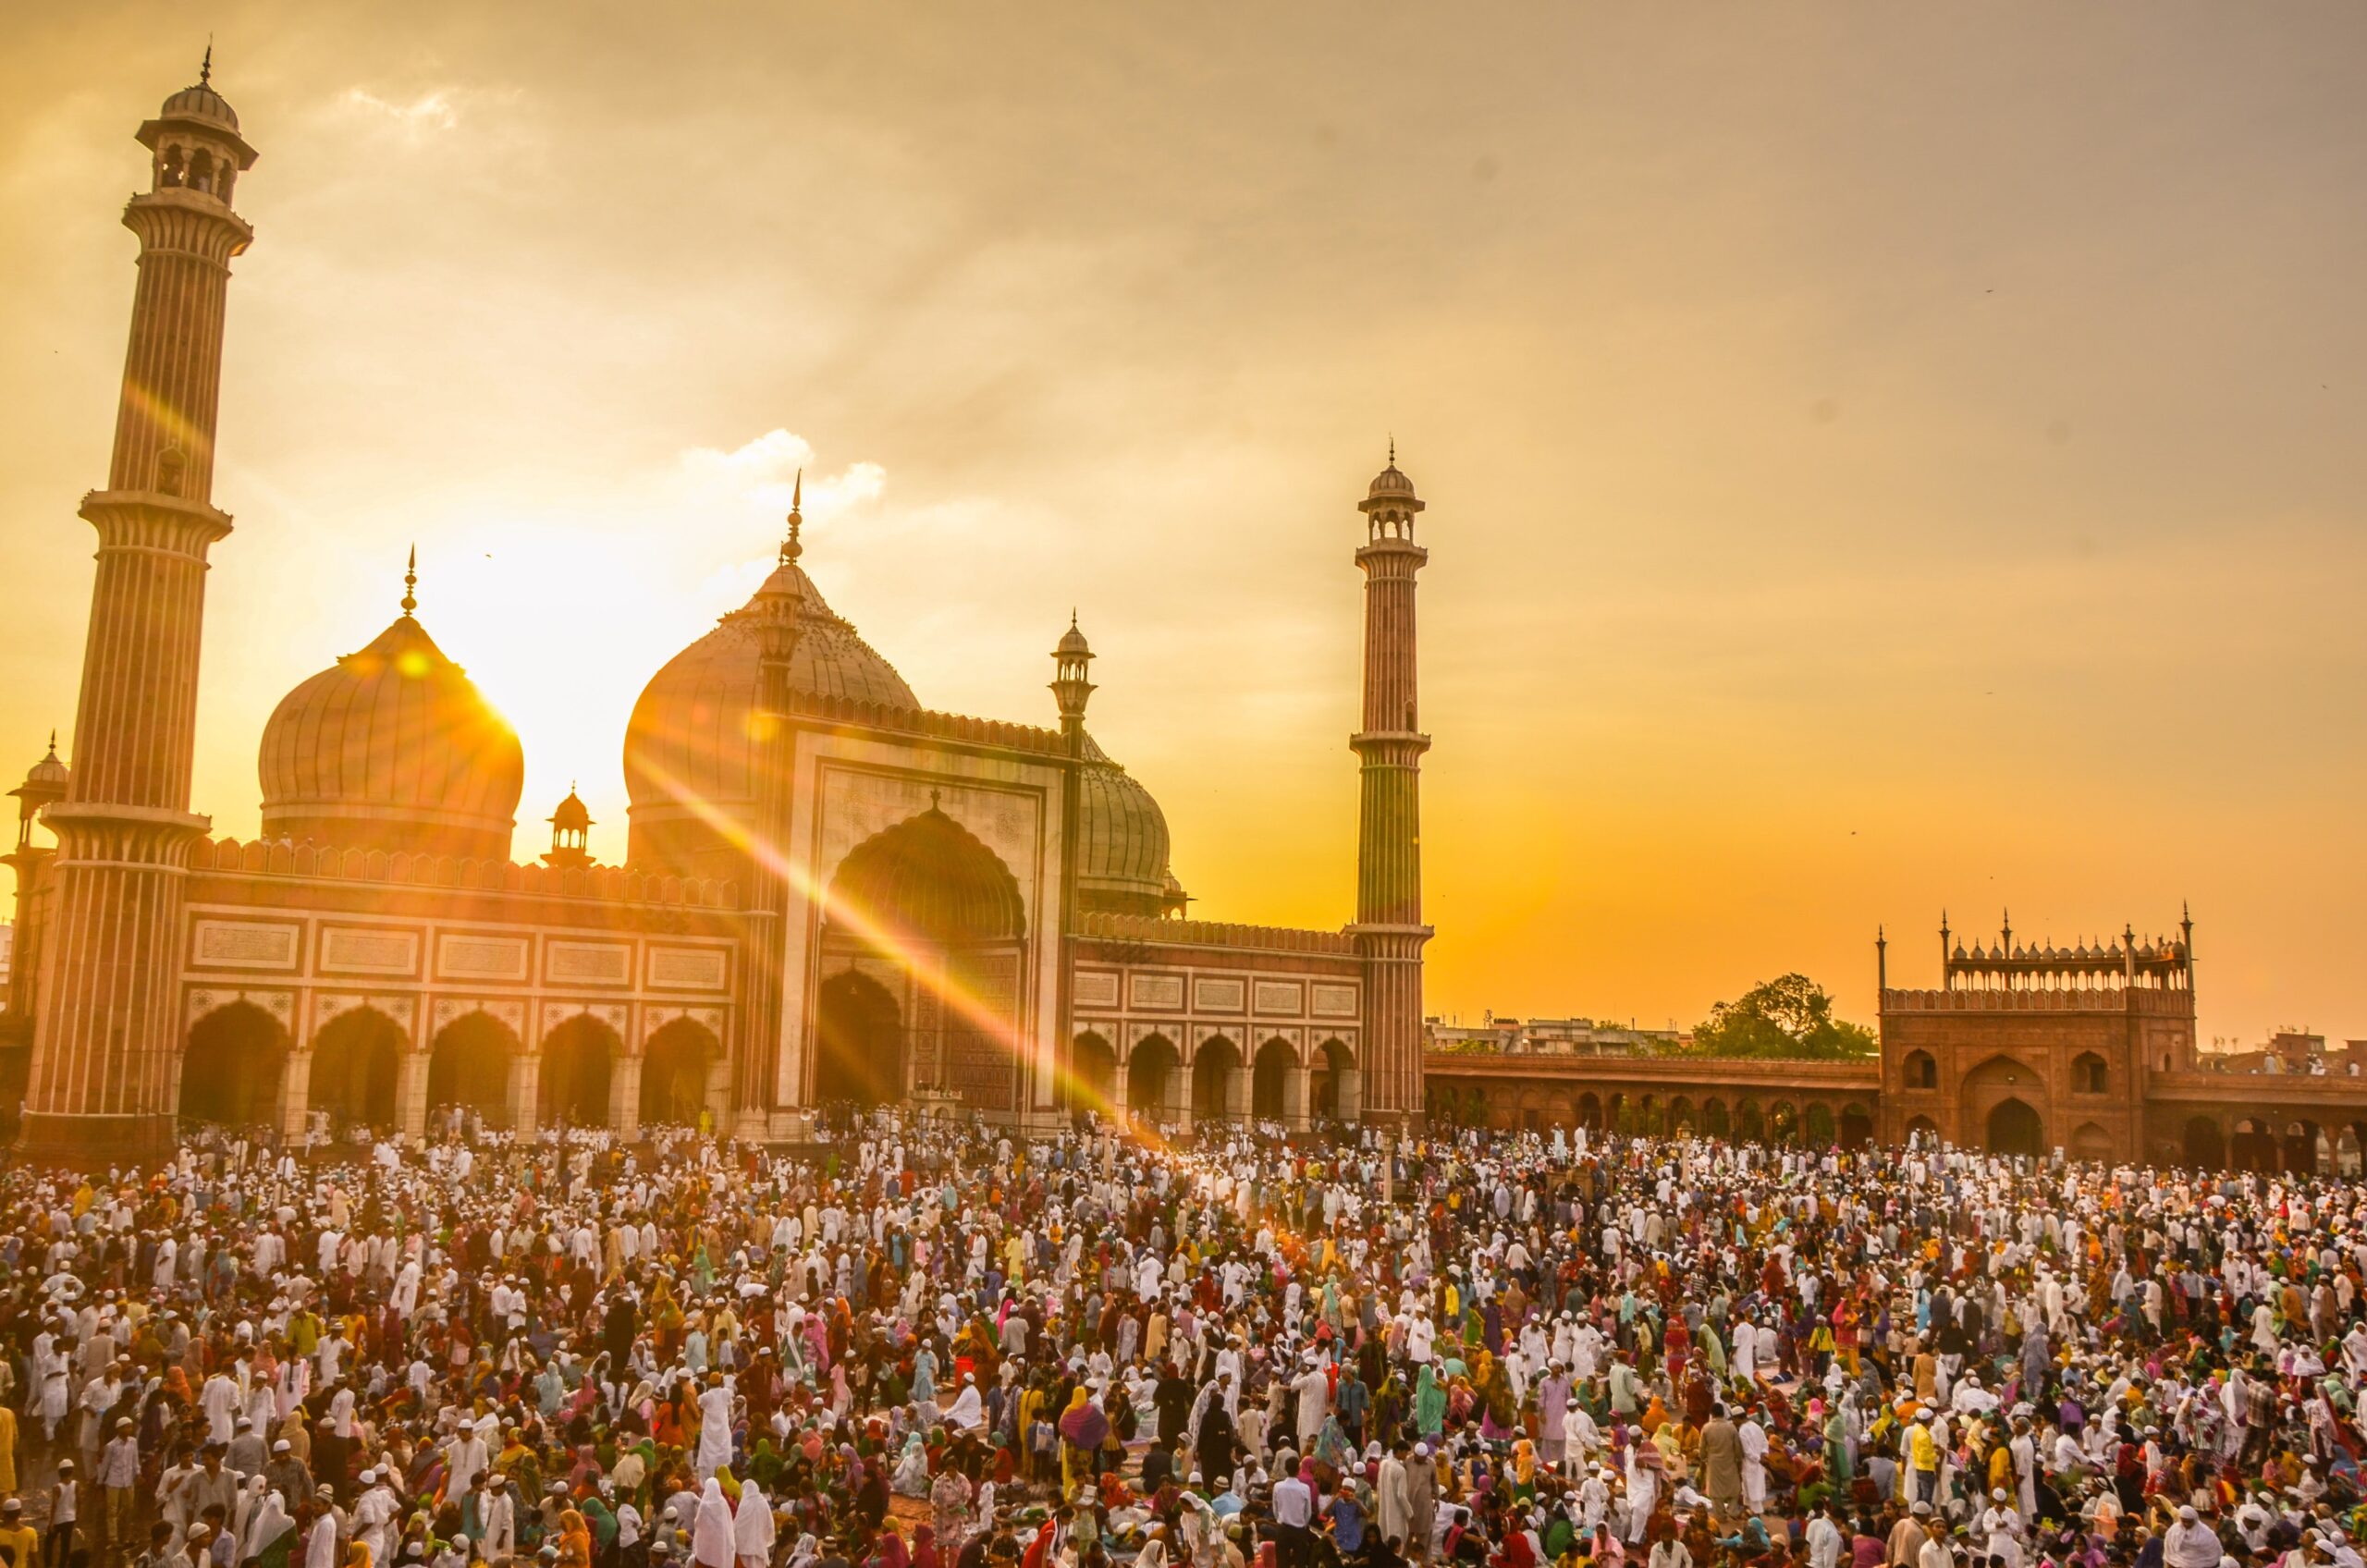 https://www.pexels.com/photo/photo-of-people-in-front-of-mosque-during-golden-hour-3163677/